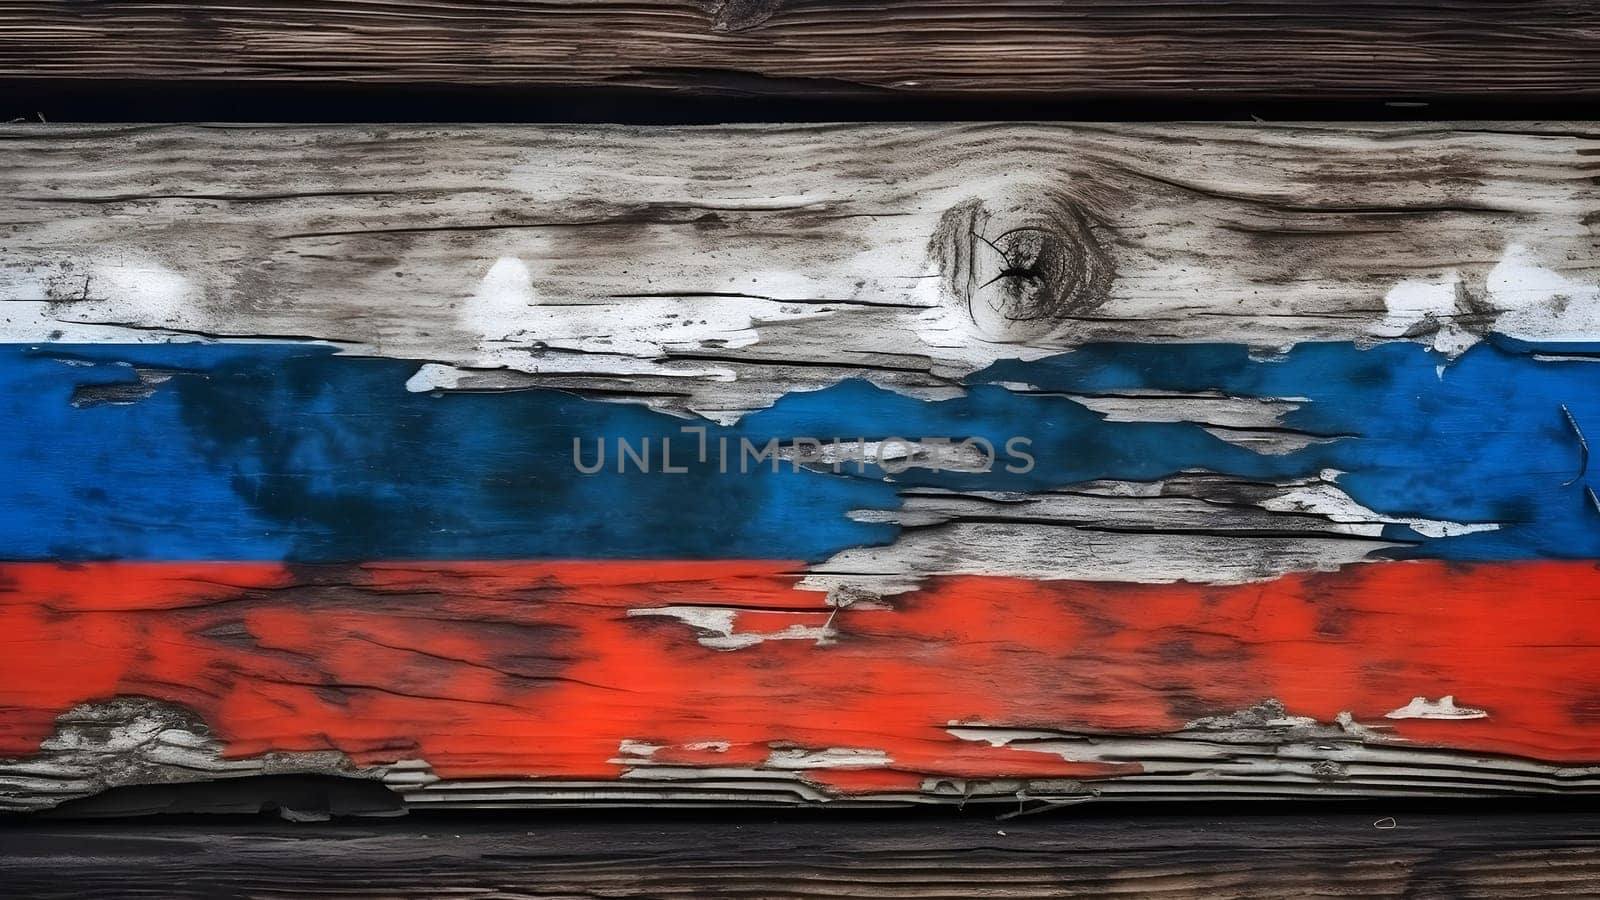 Russian flag colored barn wall, decayed old flaking paint on rotten wood surface, neural network generated image by z1b